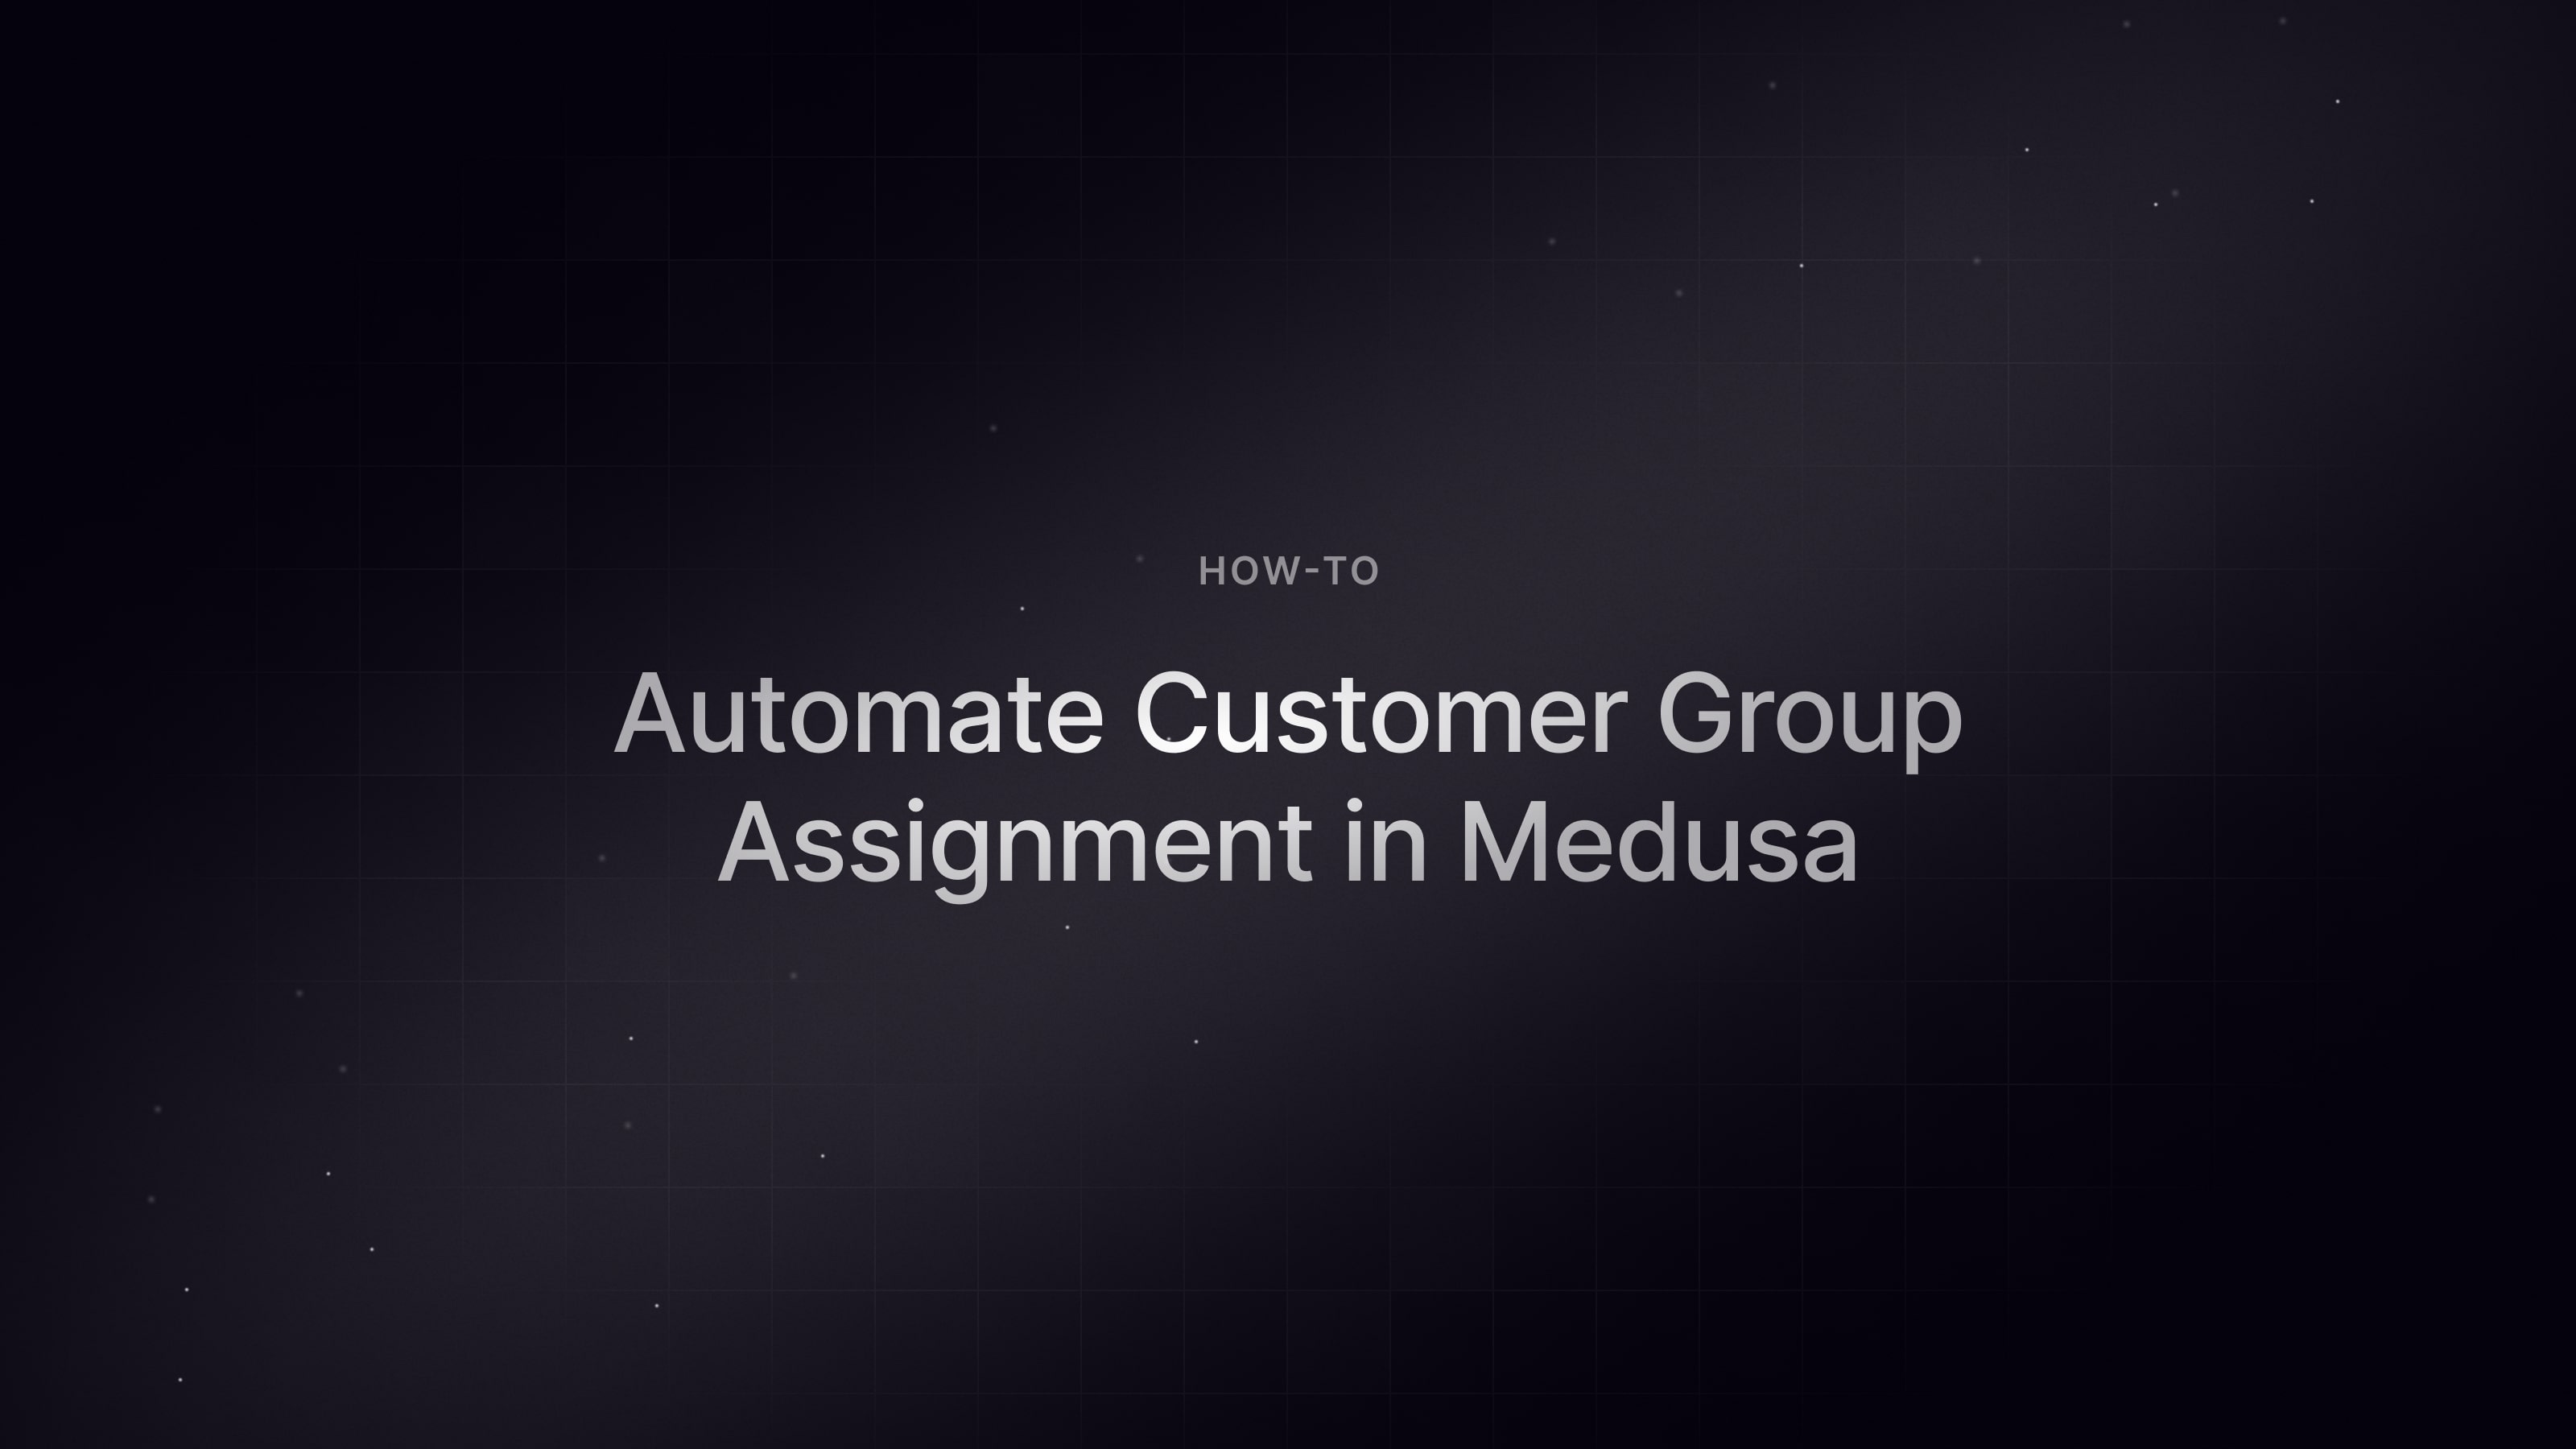 How to Automate Customer Group Assignment in Medusa